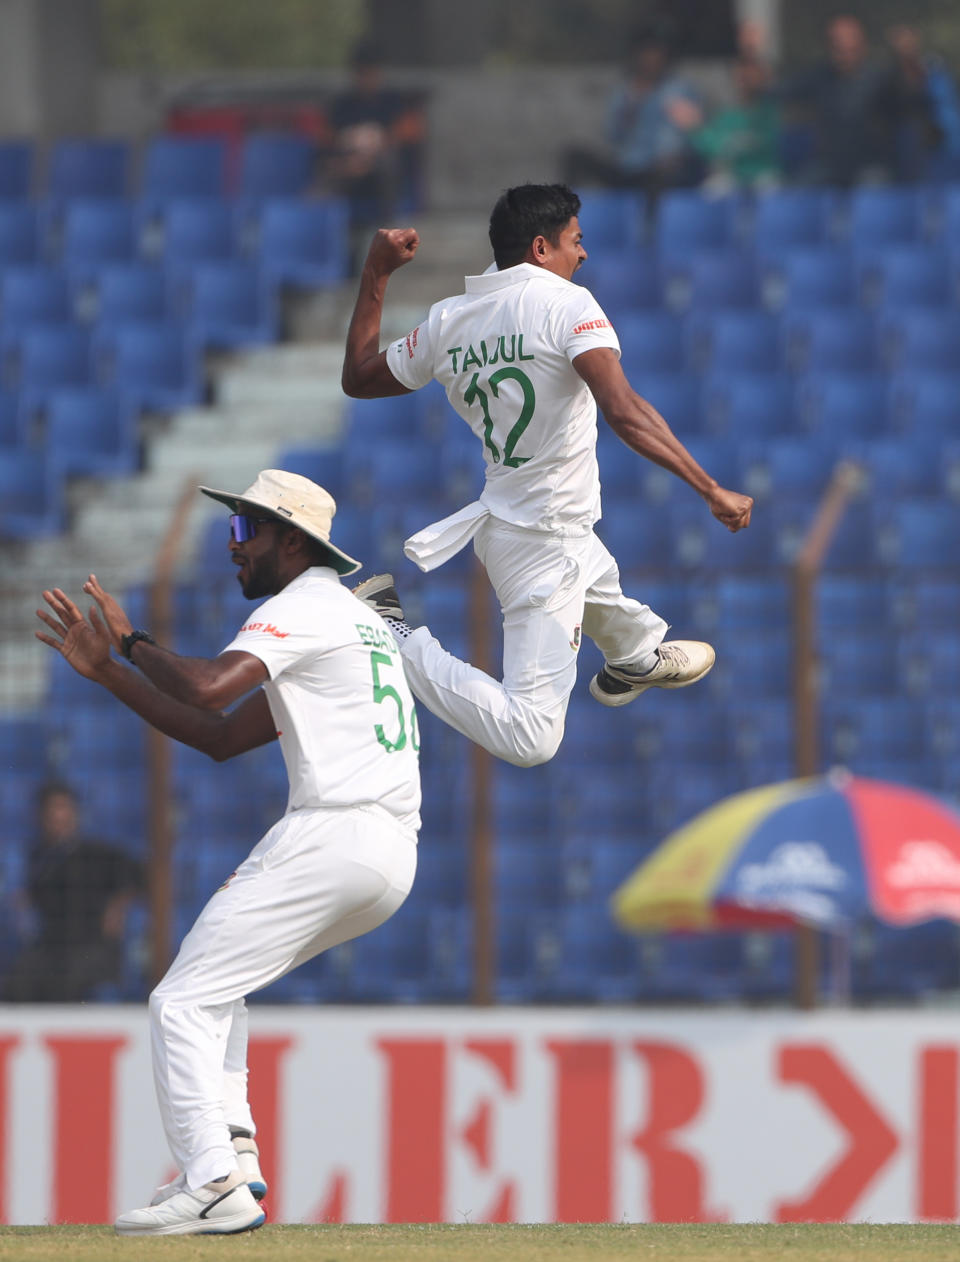 Bangladesh's Taijul Islam right celebrates wicket of India' Virat Kohli during the first Test cricket match day one between Bangladesh and India in Chattogram Bangladesh, Wednesday, Dec. 14, 2022. (AP Photo/Surjeet Yadav)